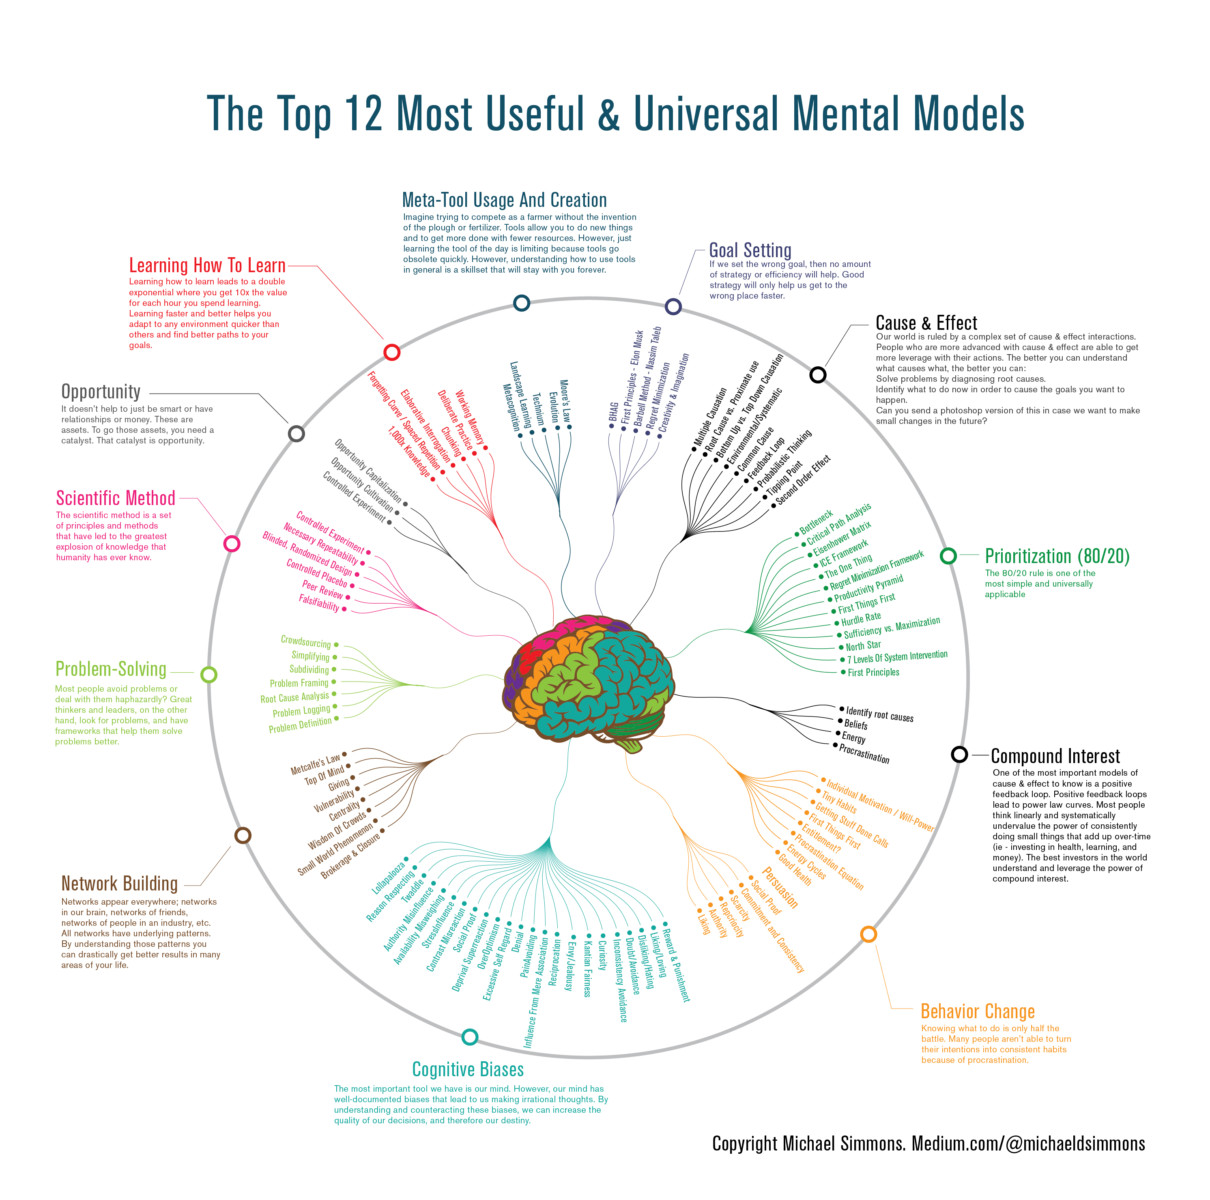 Top 12 Most Useful & Universal Mental Models - The Big Picture